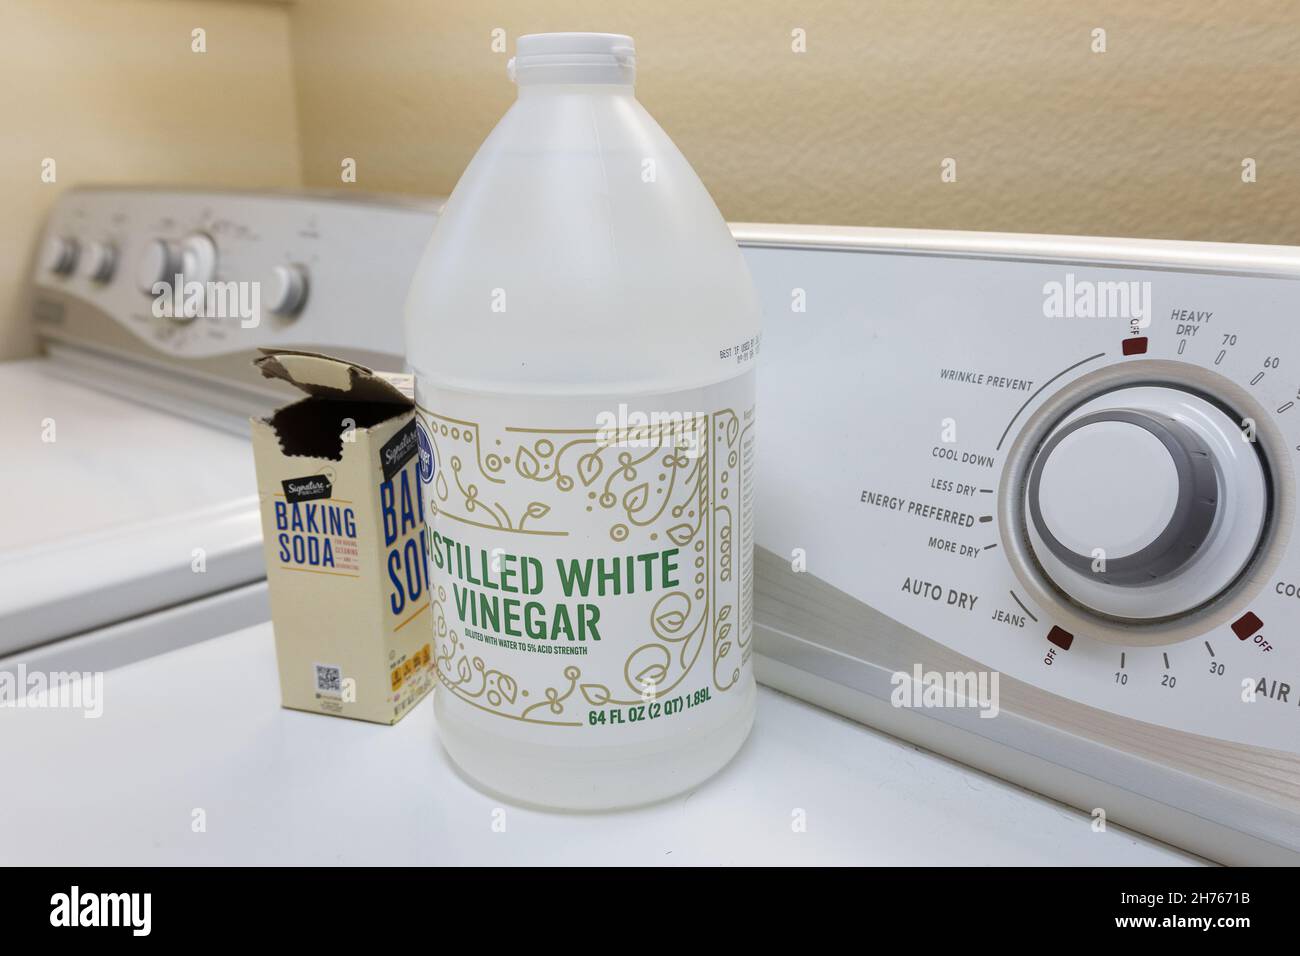 White vinegar and baking soda in a laundry room, used for freshening musty towels and other laundry. Stock Photo